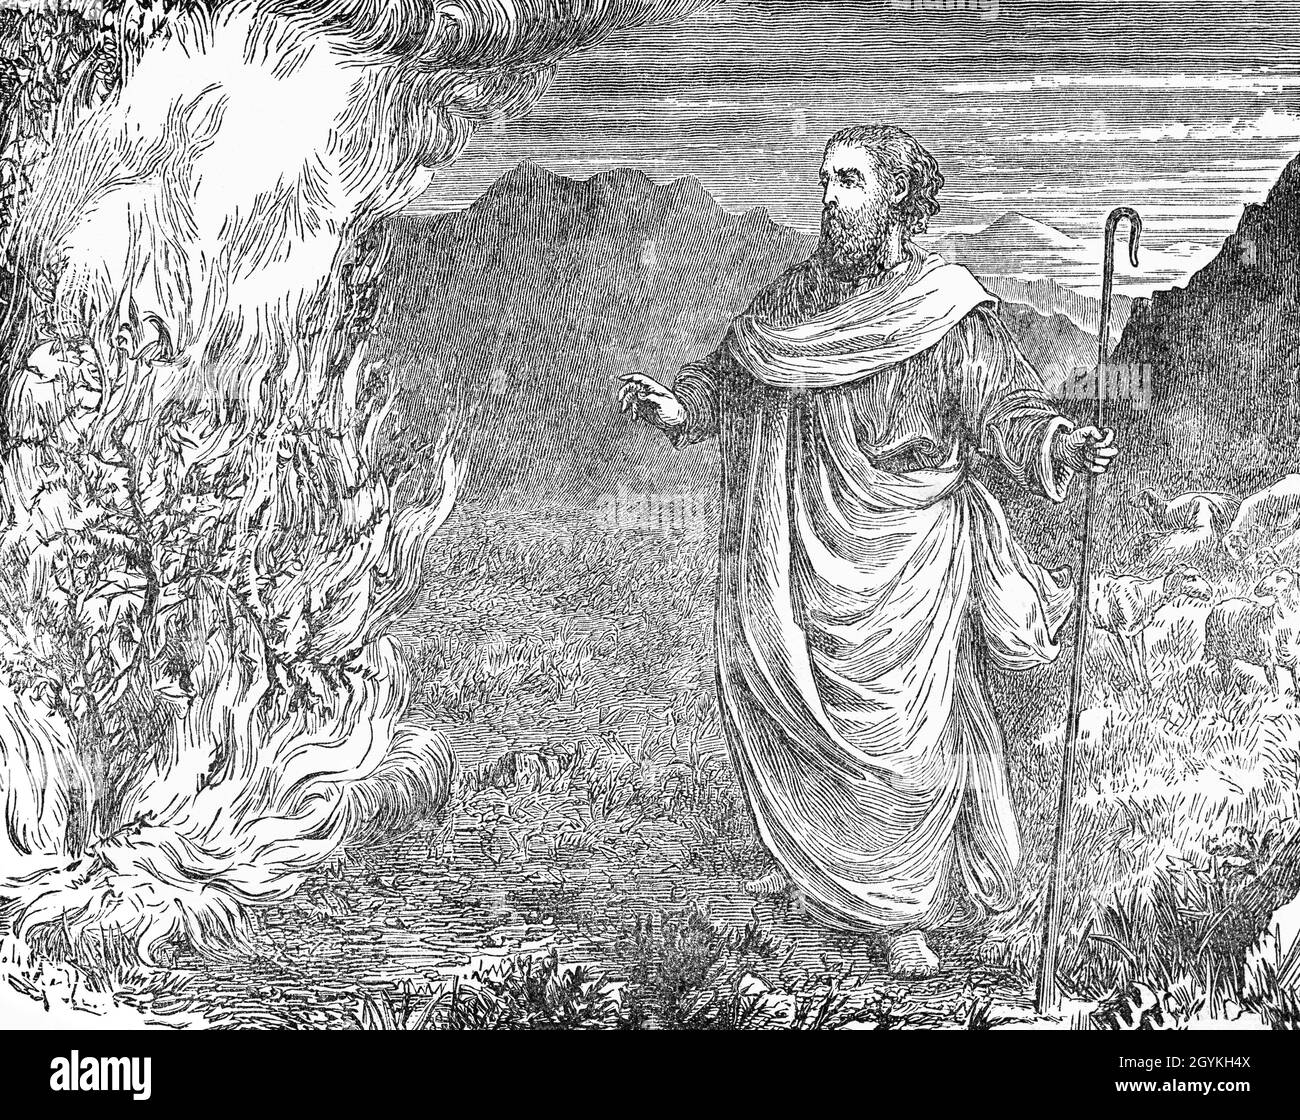 A late 19th Century illustration from the Book of Genesis of the story of Moses who, when shepherding his father-in-law Jethro's sheep in the land of Midian, is witness to a burning bush on Mount Horeb.  When Moses approaches the bush, the voice of God calls out to him to remove his sandals in the presence of the holy ground.  God explains to Moses he has a plan for him to save the Israelites from slavery in Egypt and lead them to the Promised Land of Canaan. Stock Photo